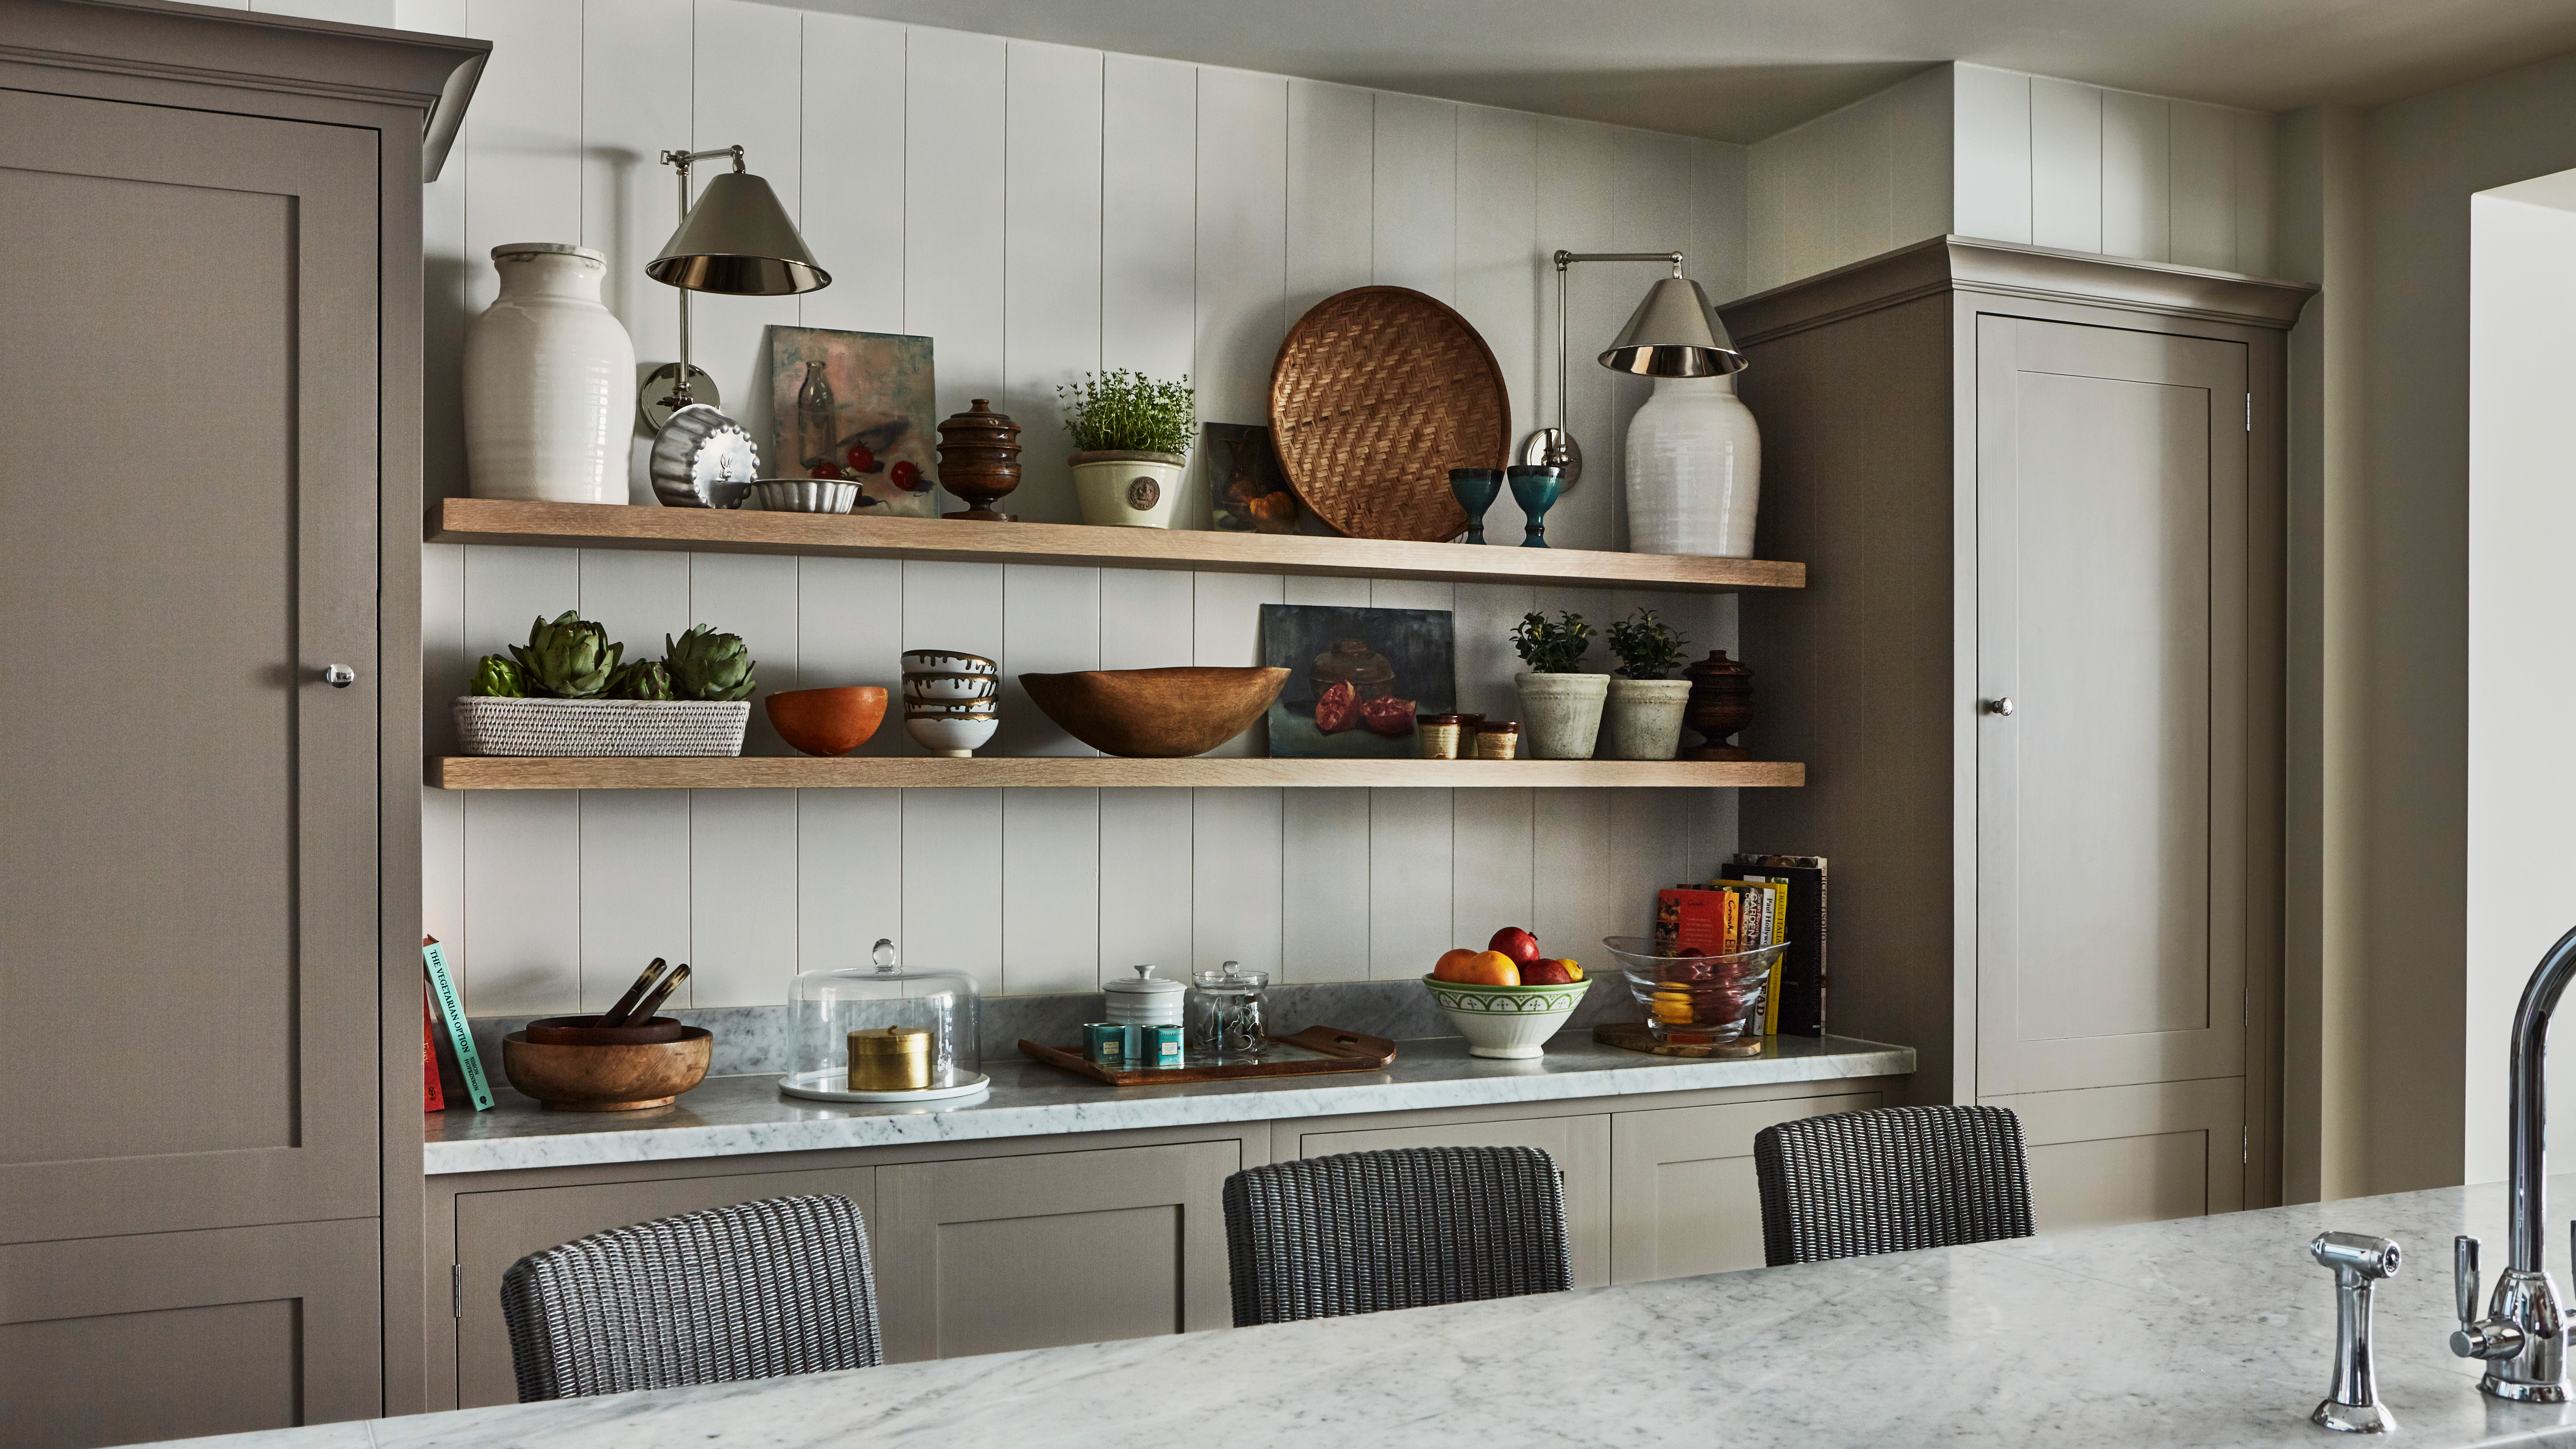 Kitchen Shelving Ideas 14 Ways To, How To Decorate Open Shelving In Kitchen